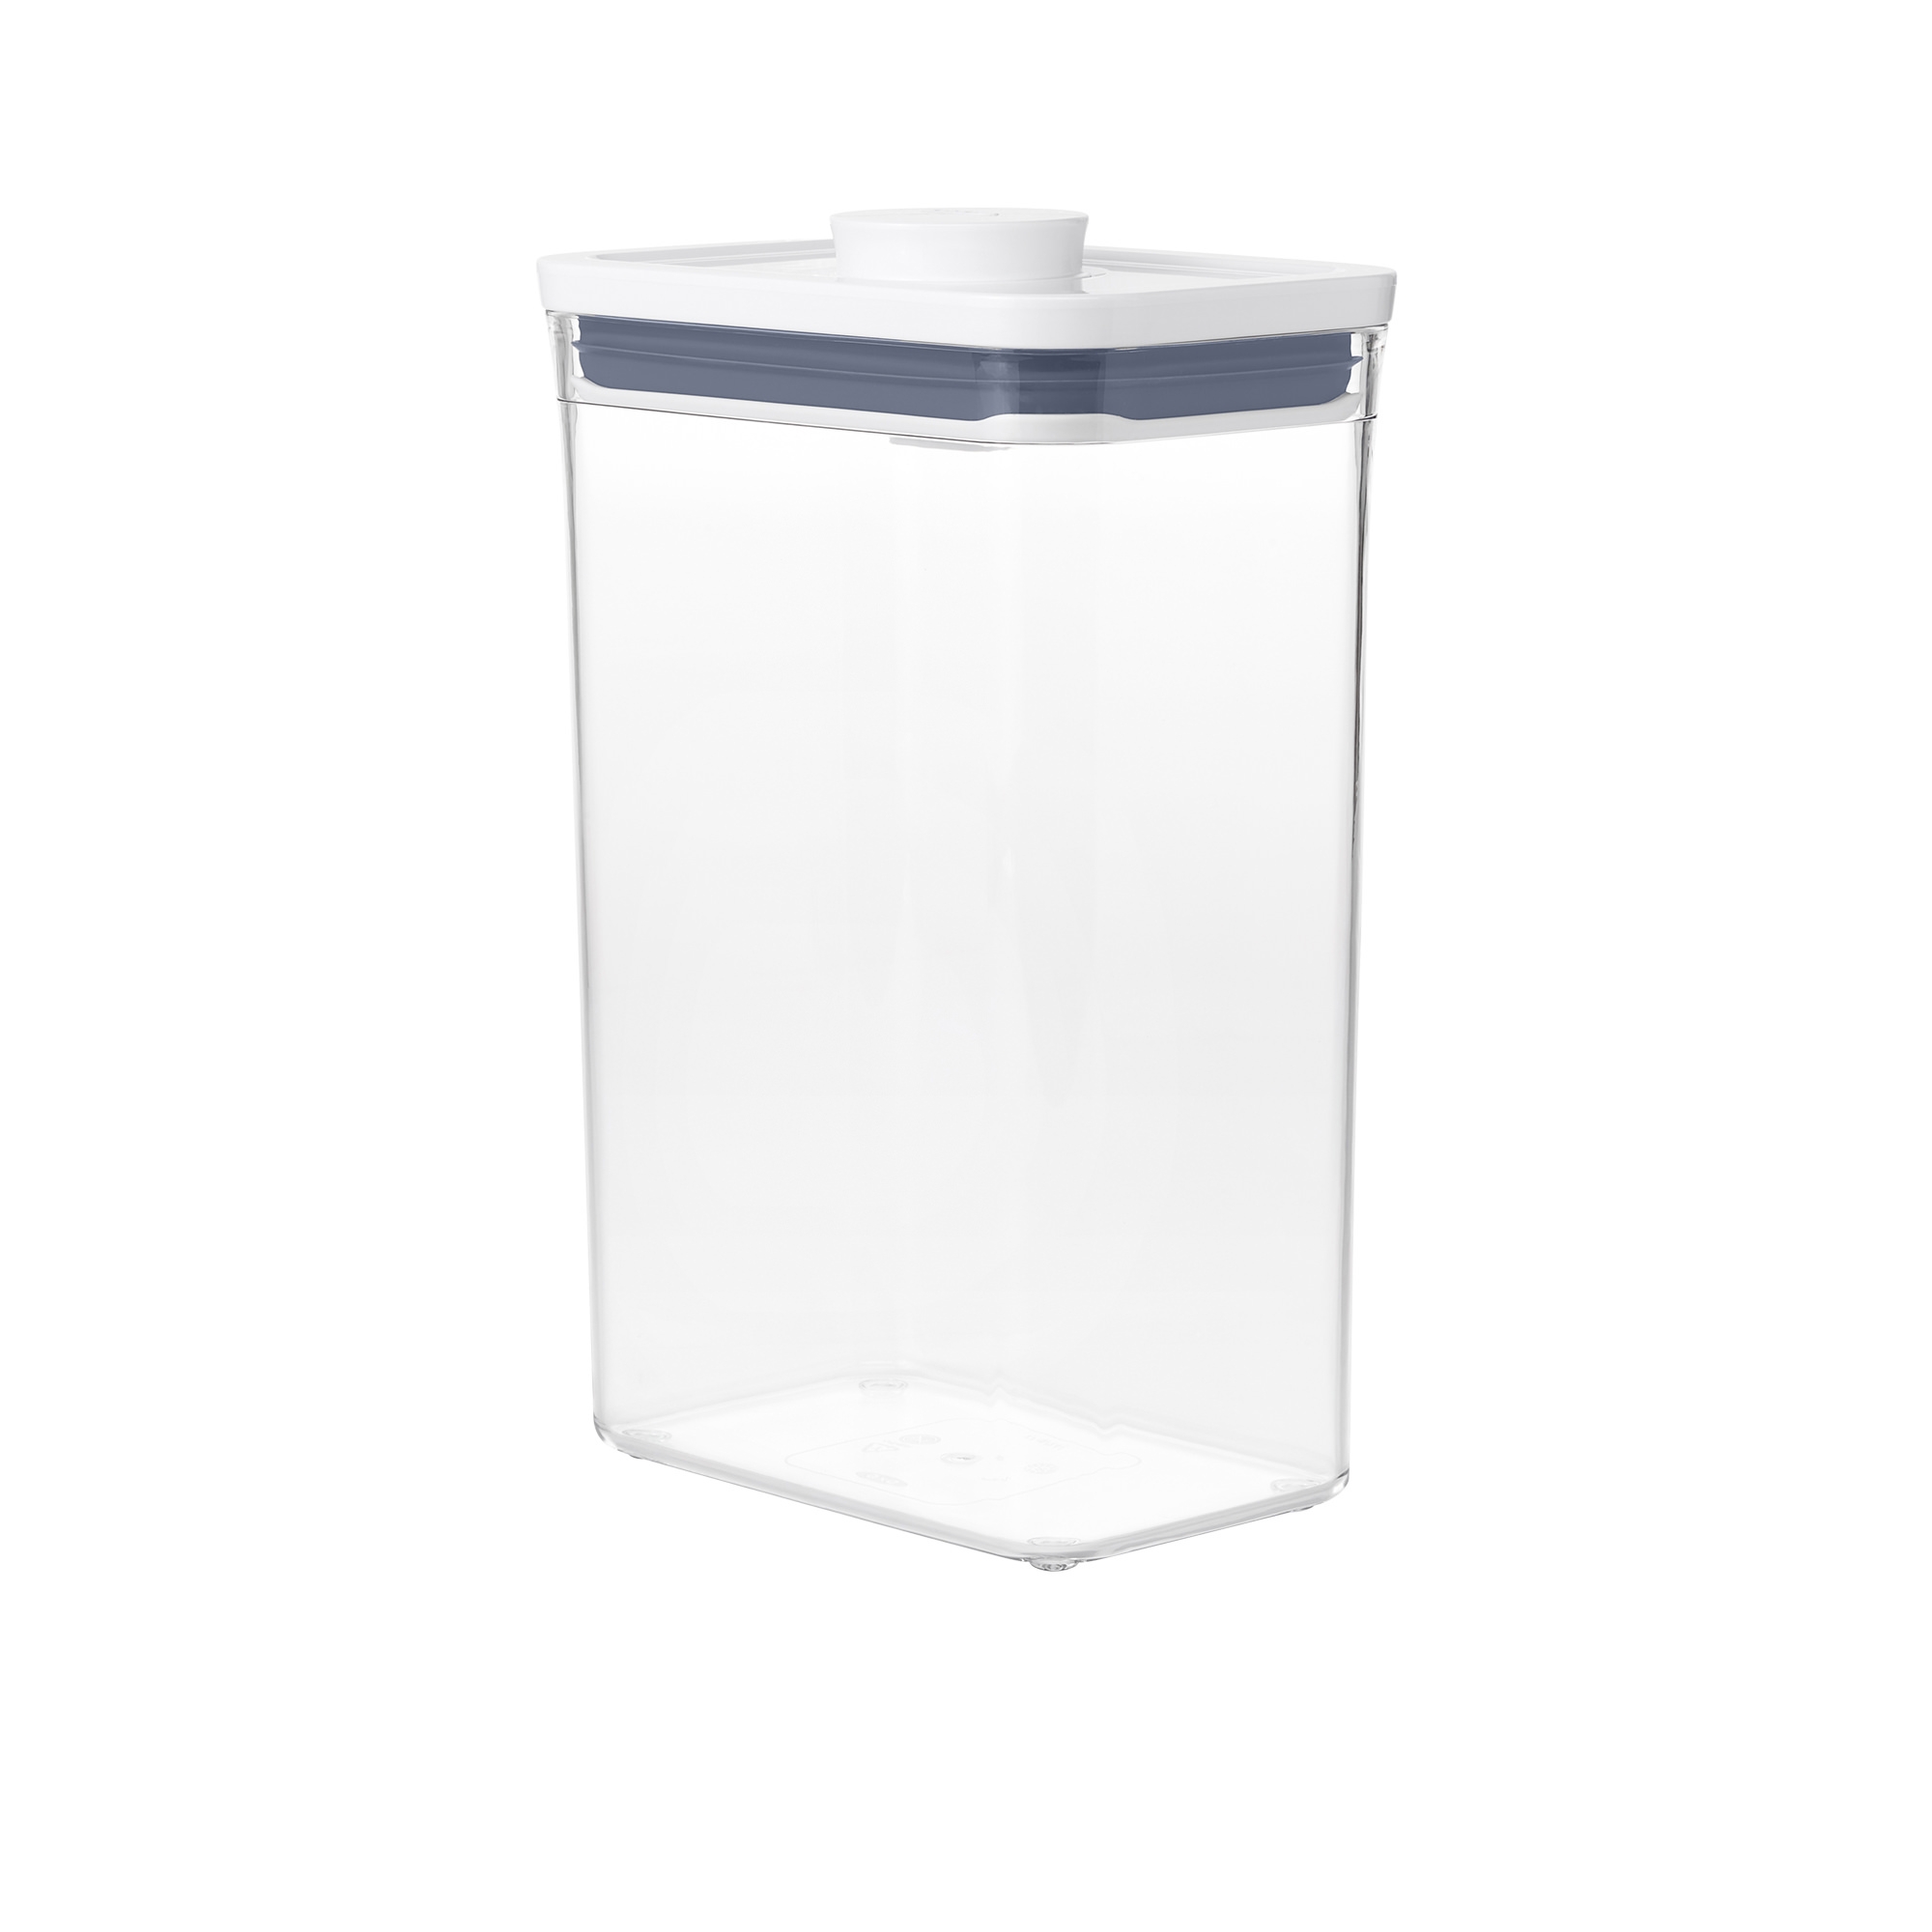 OXO Good Grips Rectangular Pop 2.0 Container 2.6L Image 1